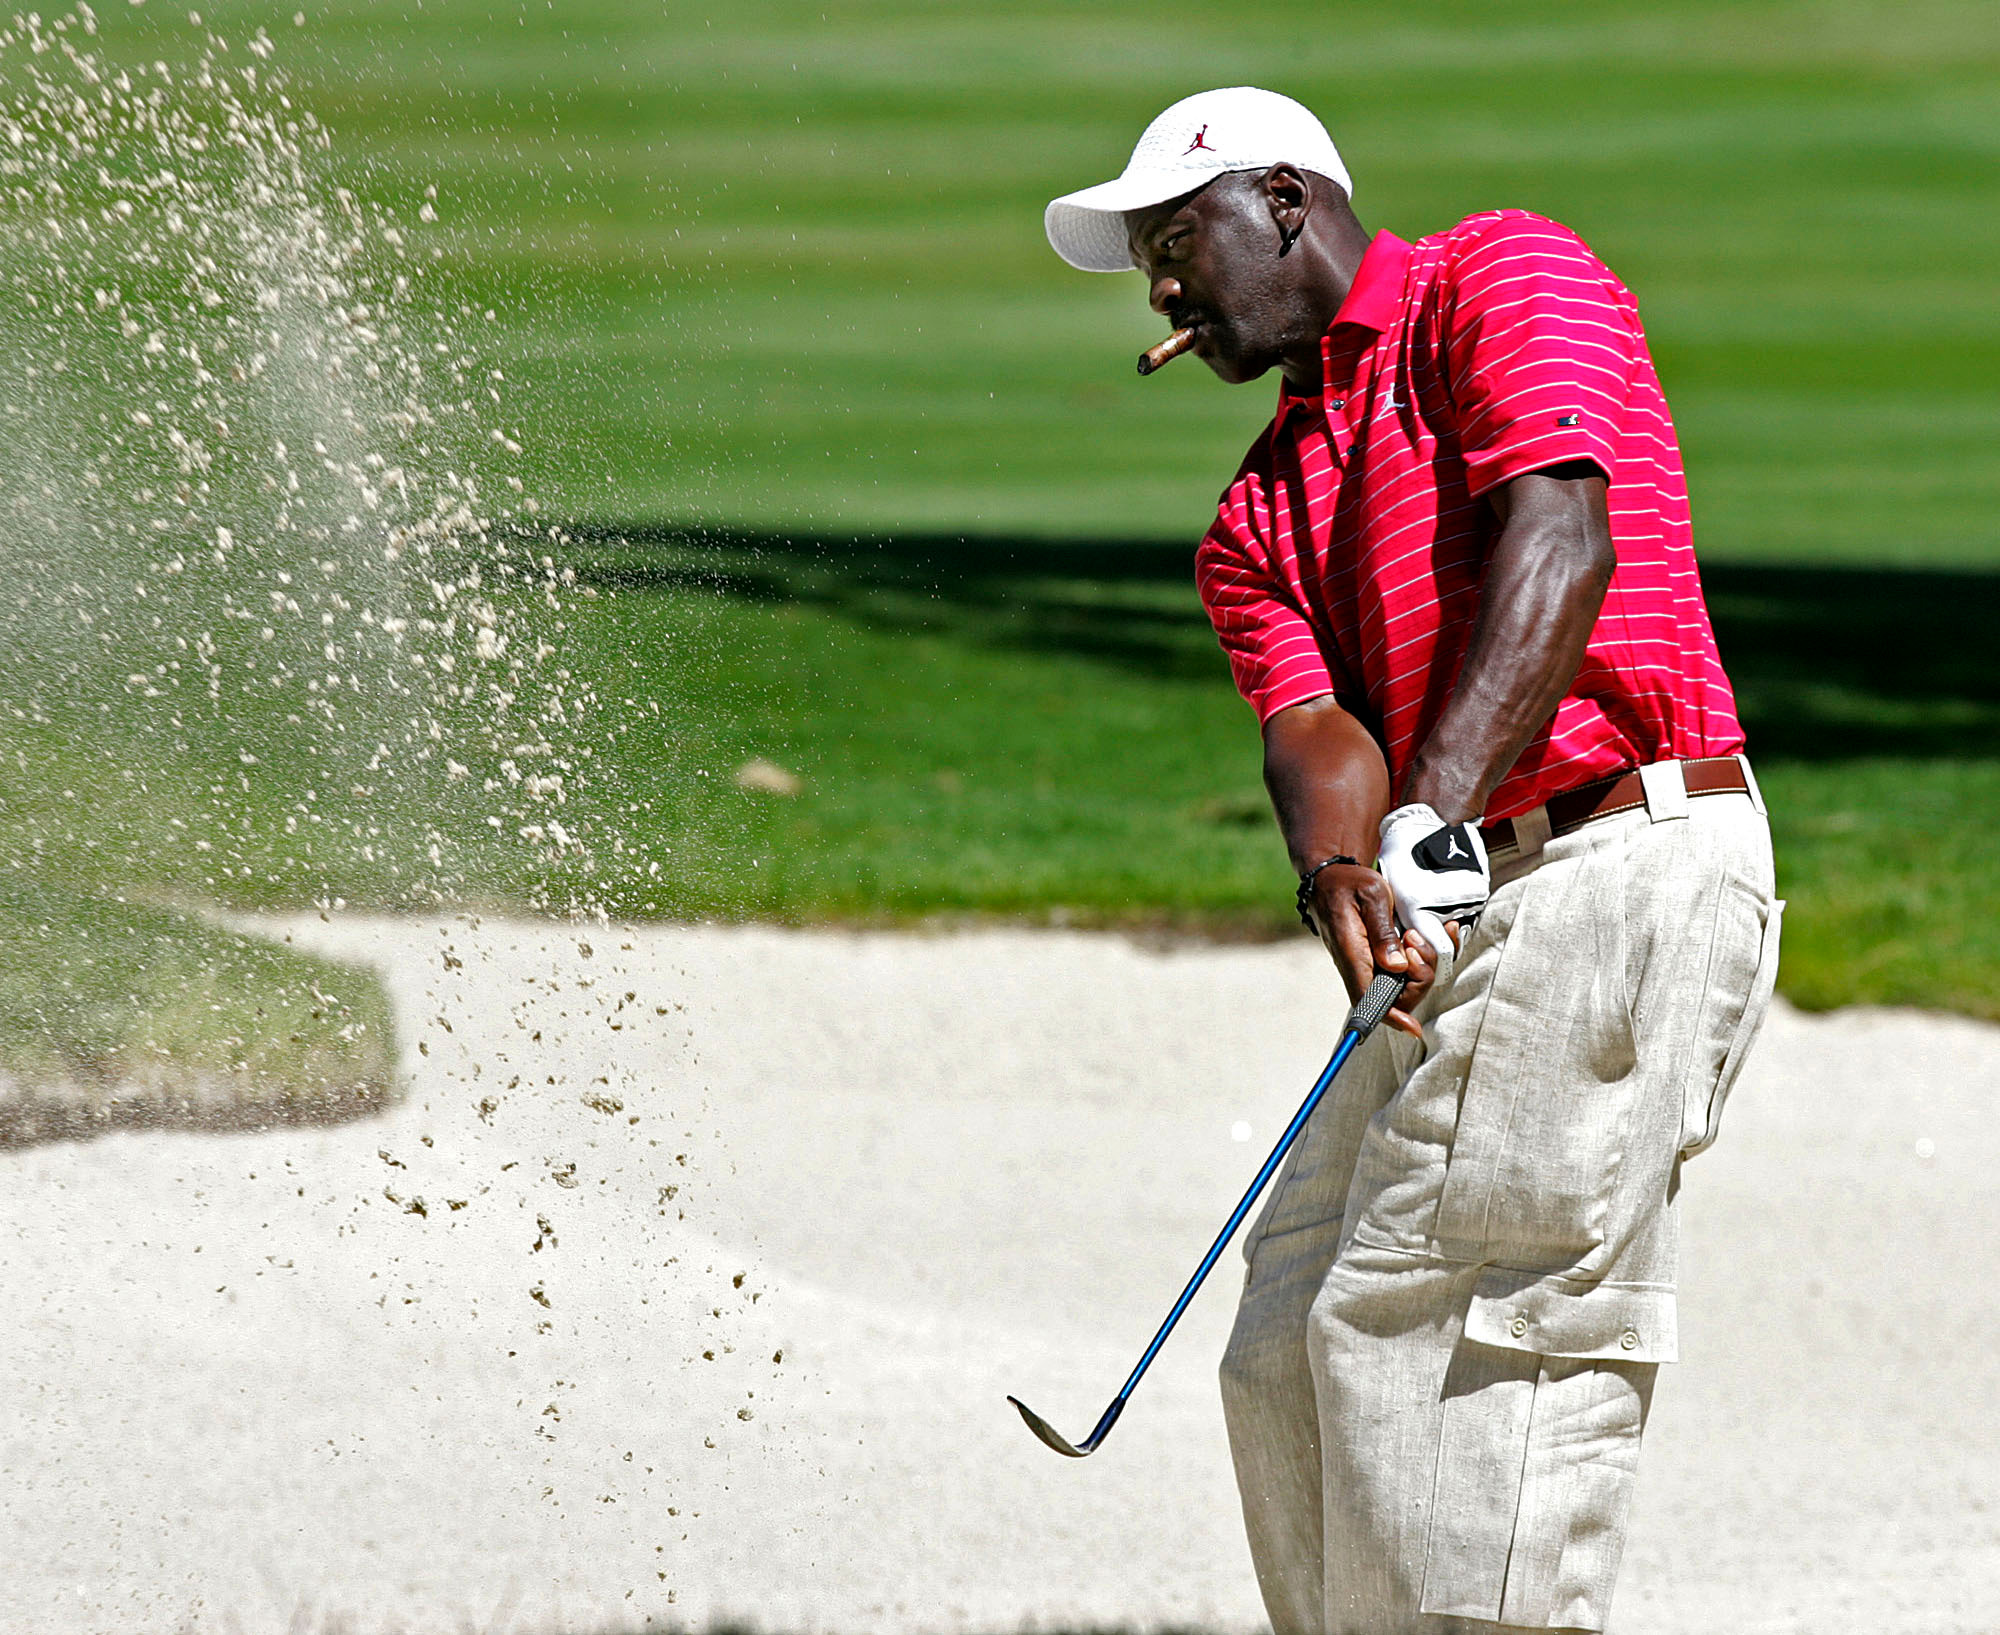 Michael Jordan hits out of a bunker on the 16th hole at Edgewood Tahoe Golf Course.